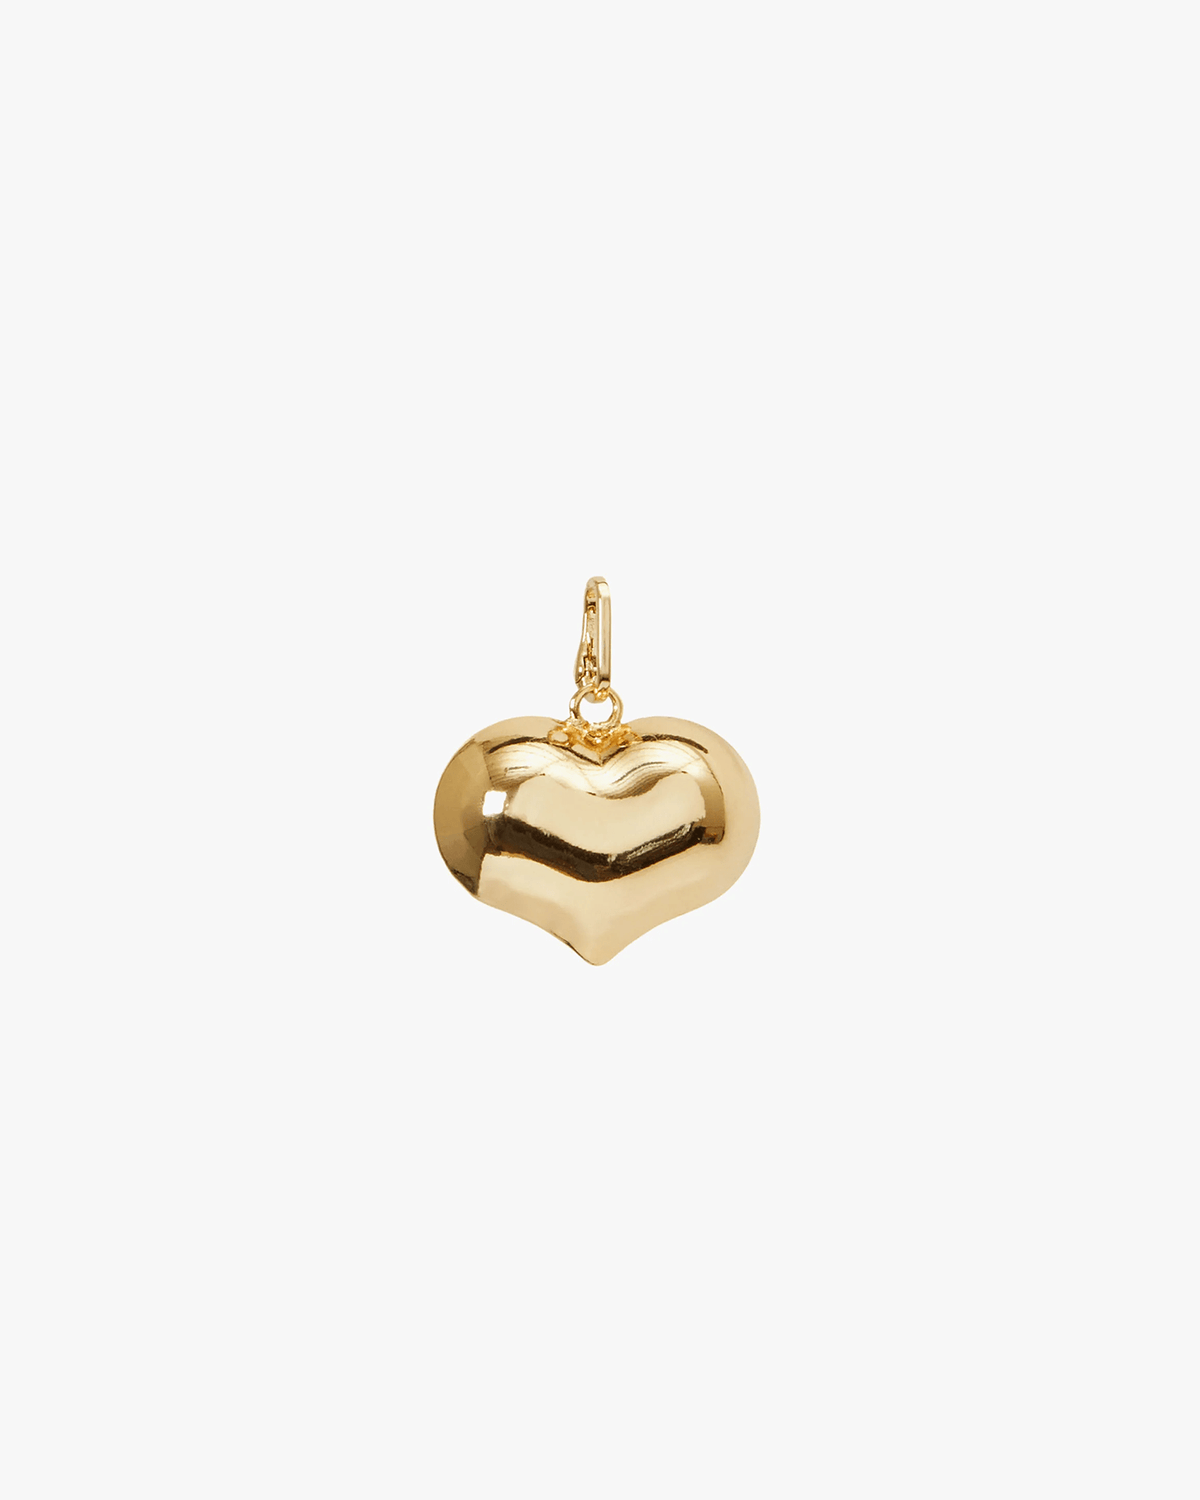 Clare V. Jewelry Vintage Gold Mylar Heart Charm in Vintage Gold